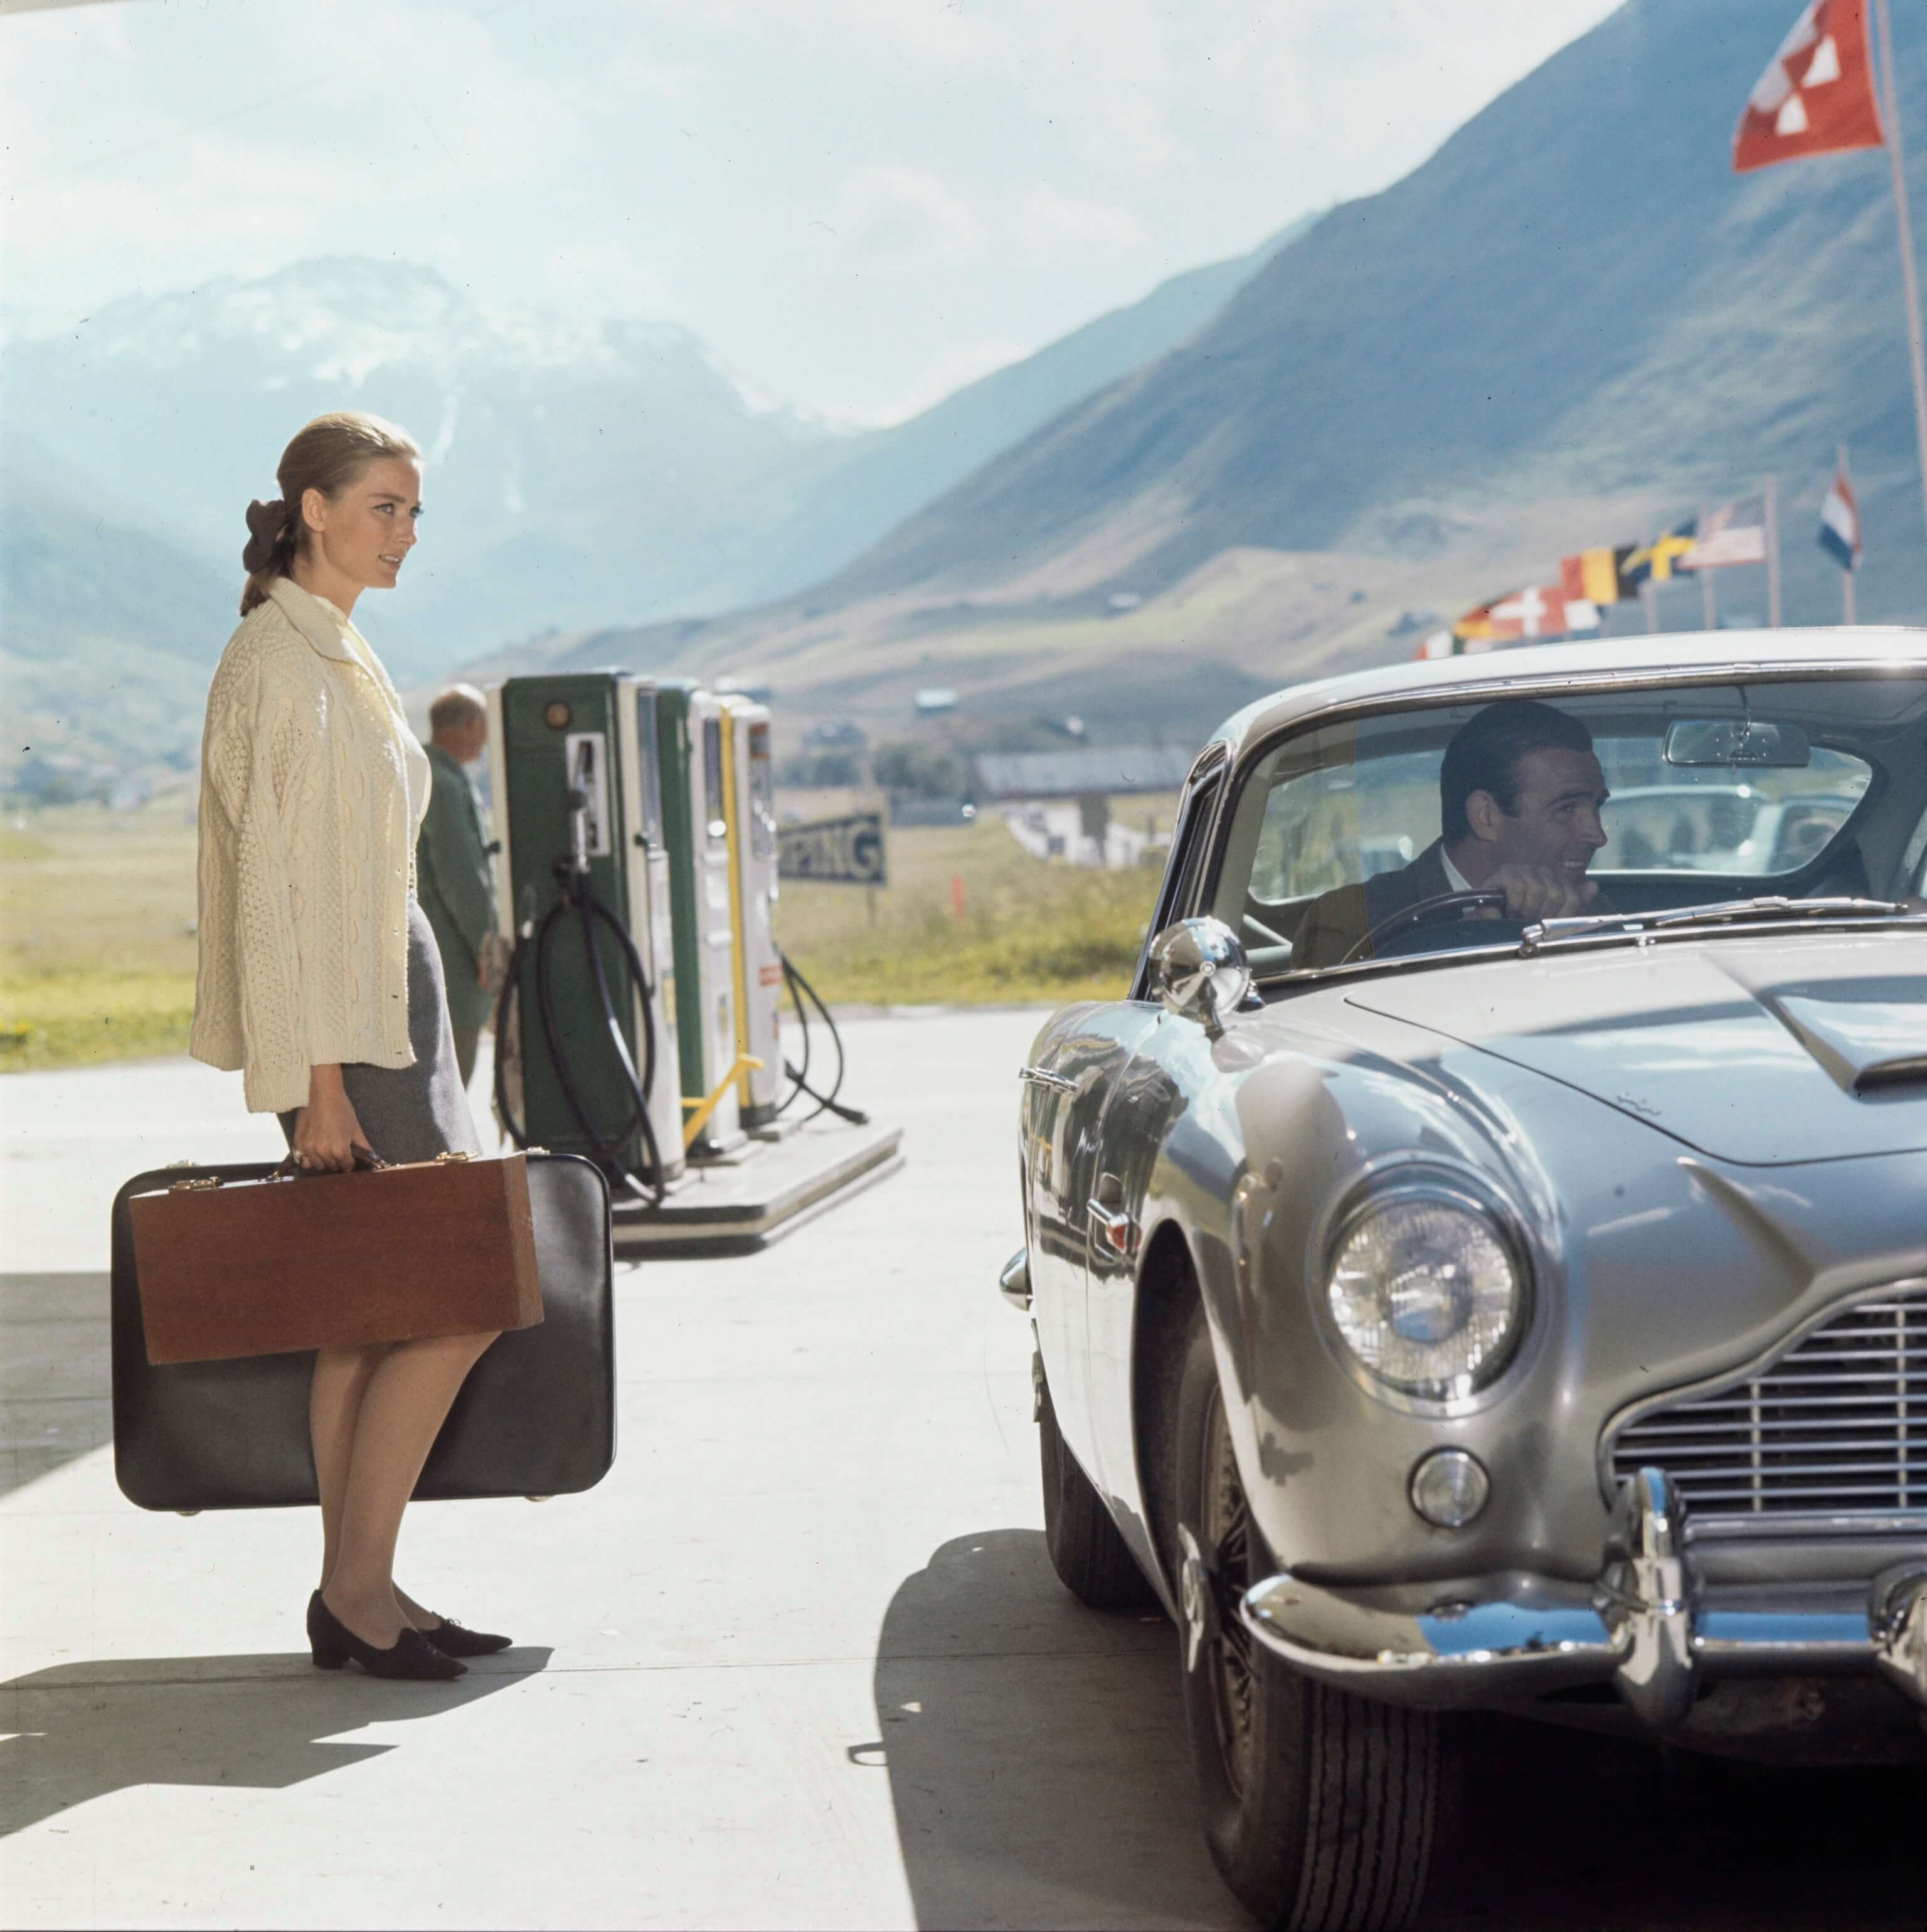 Sean Connery and Tania Mallet at the petrol station Aurora in Andermatt